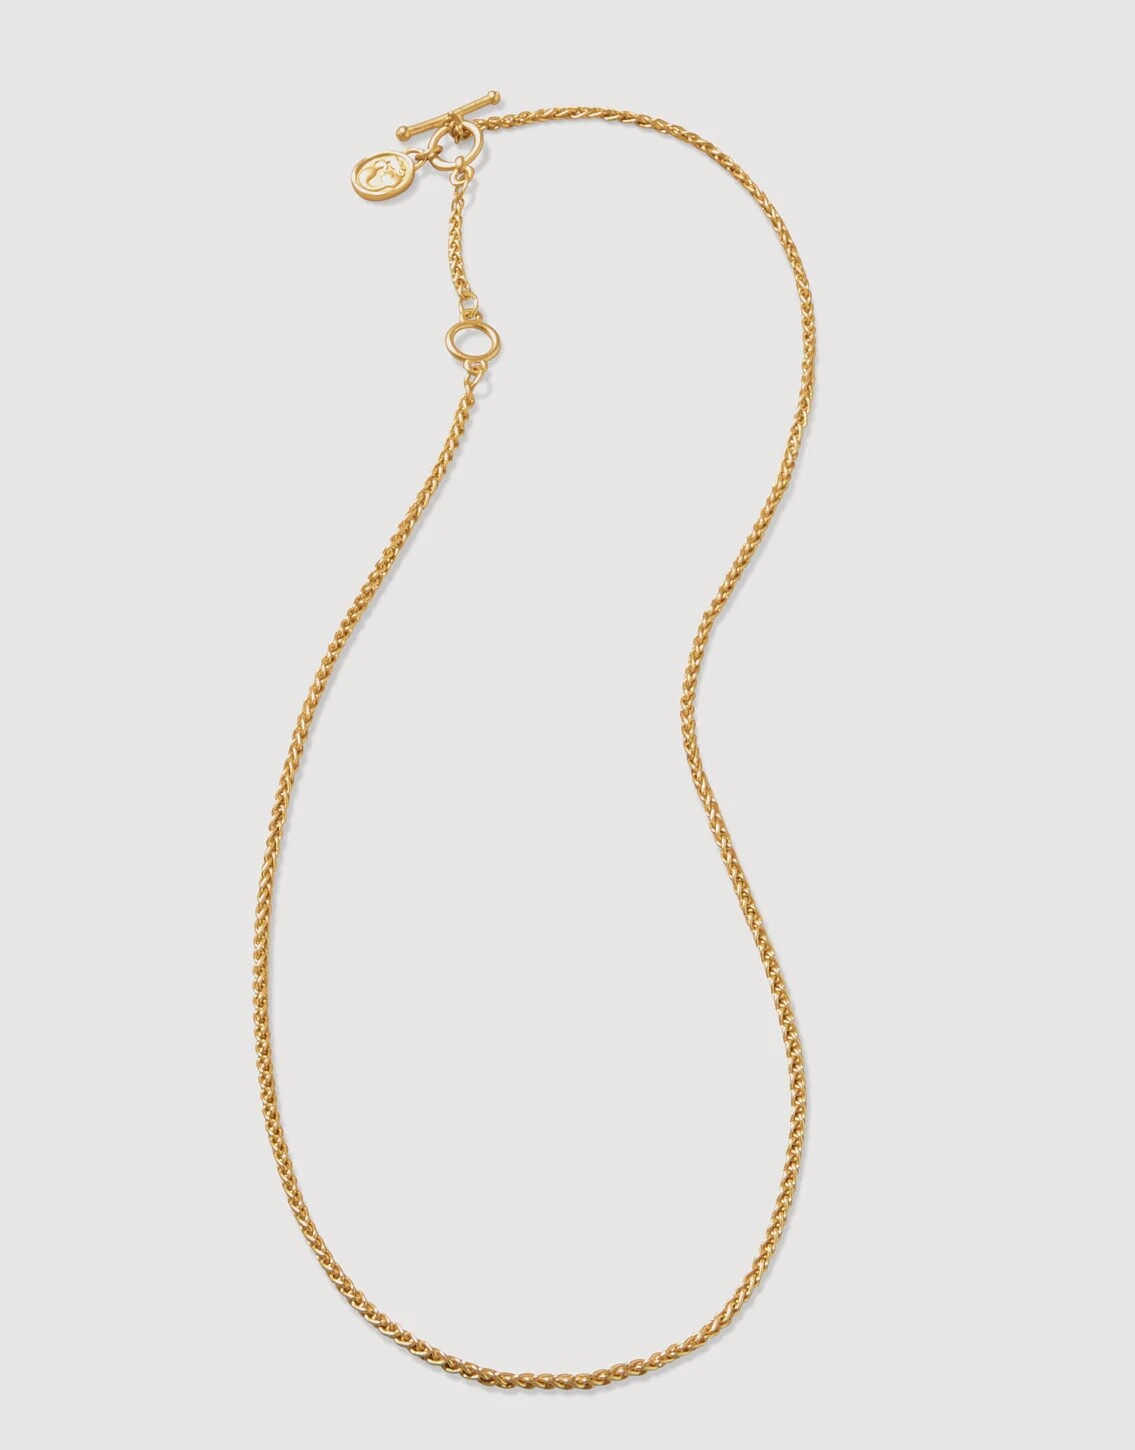 Spartina Toggle Charm Necklace Base, 18"